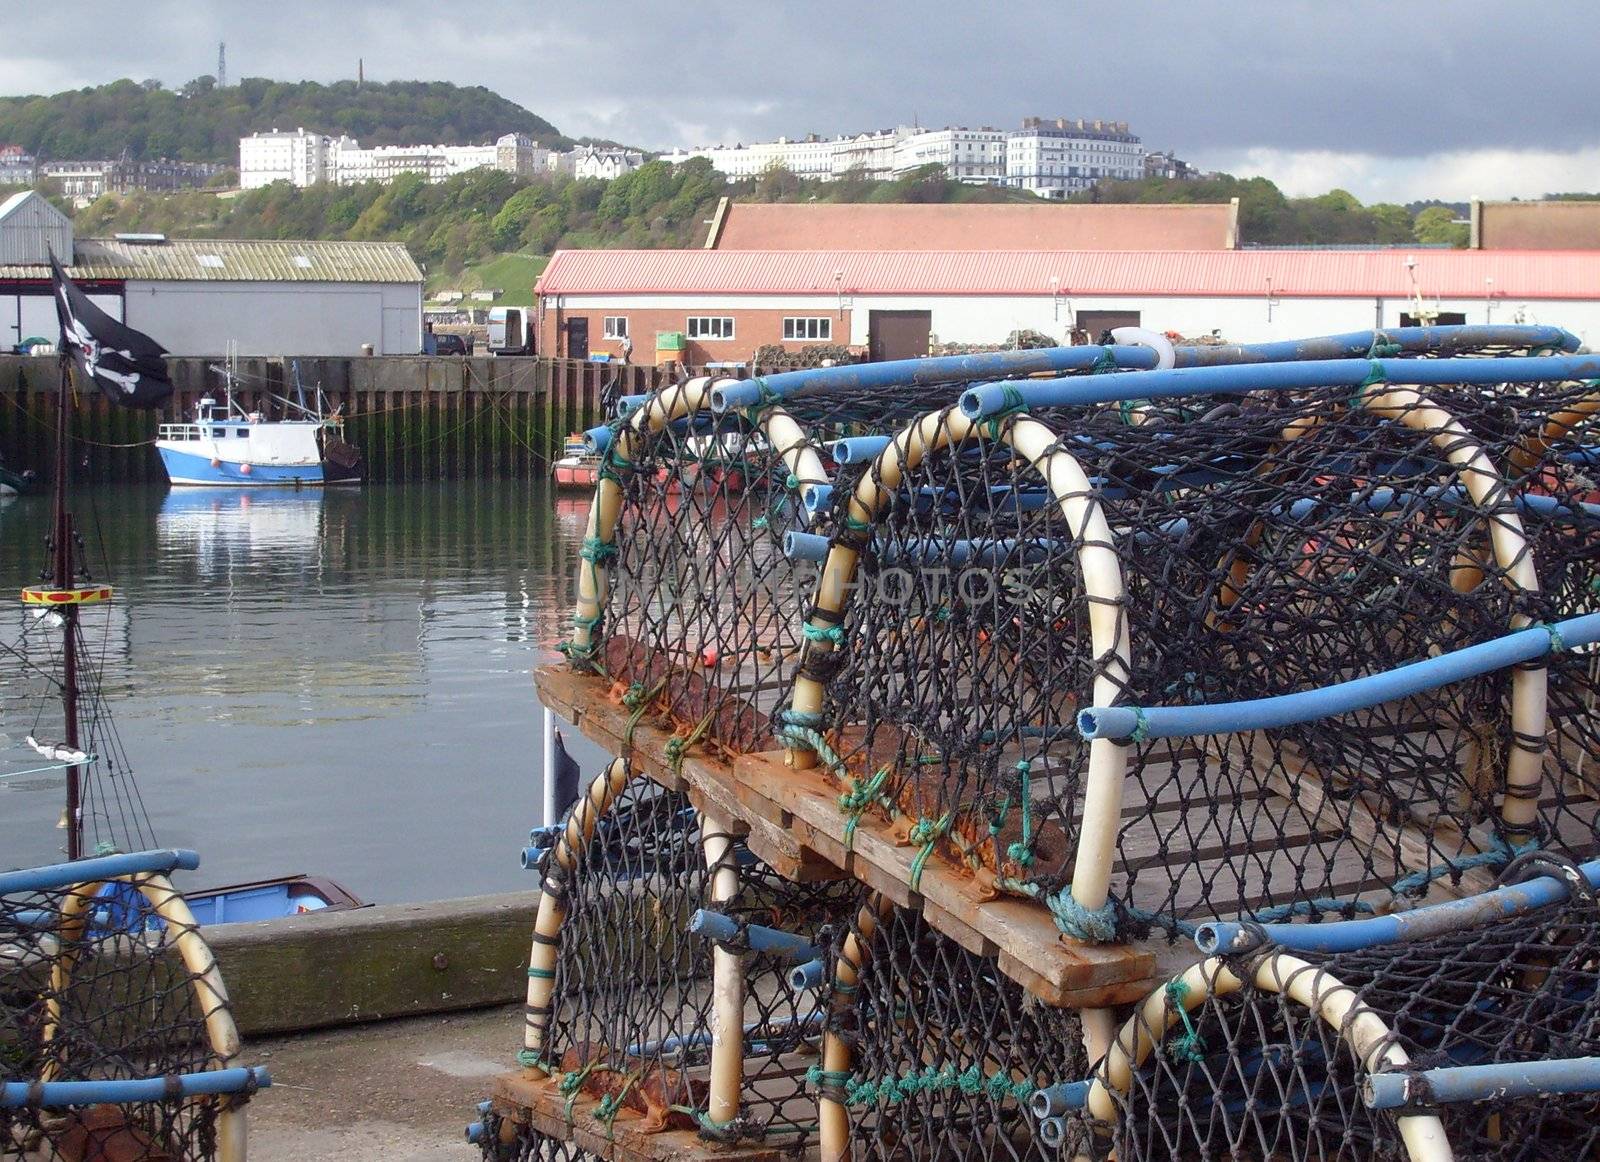 Lobster pots on quayside in harbor scene, Scarborough, England.